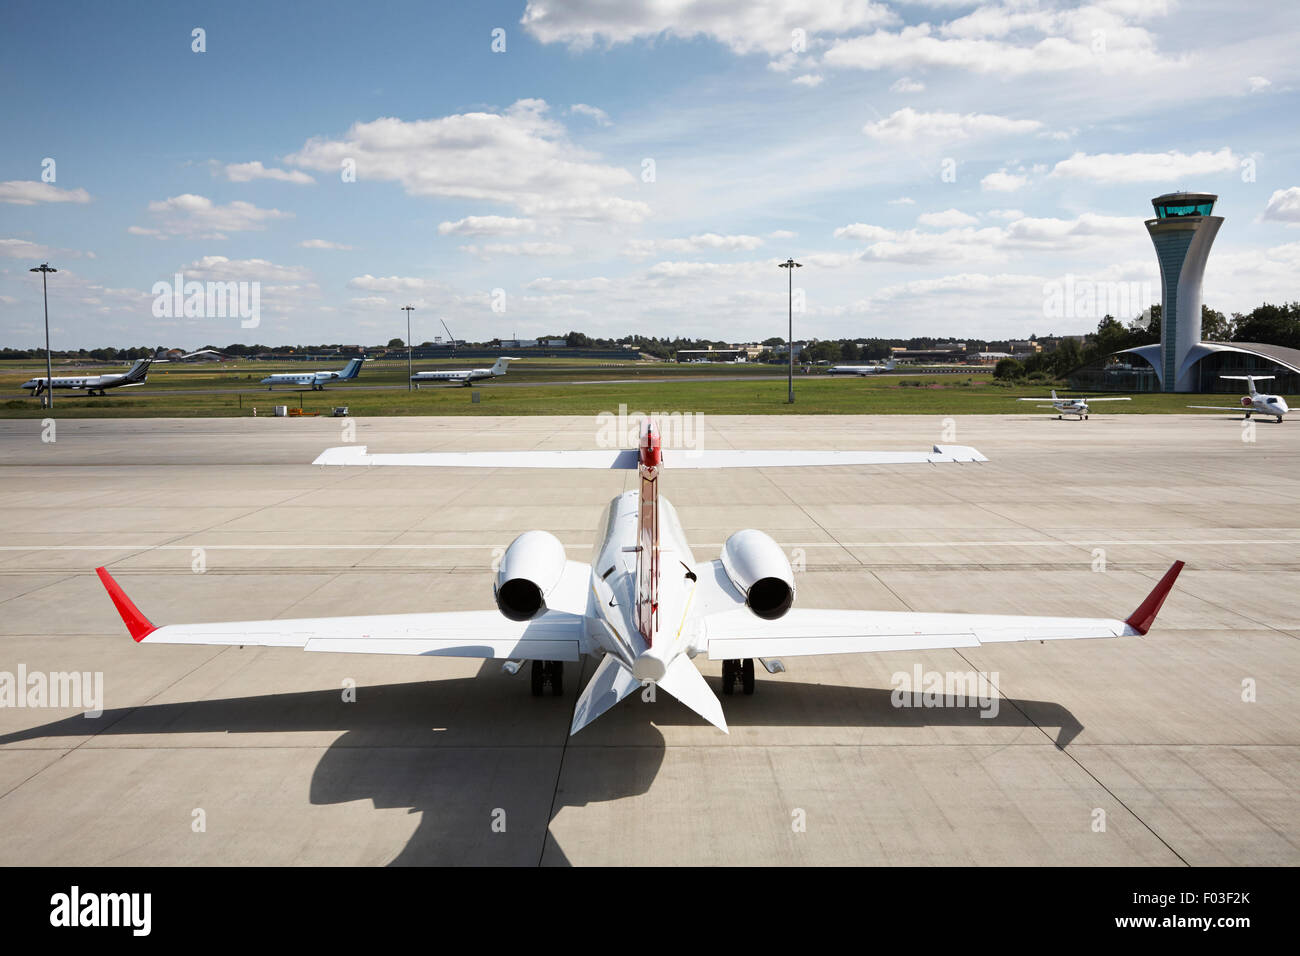 A Learjet seen from behind sits on the tarmac at Farnborough Airport. Stock Photo